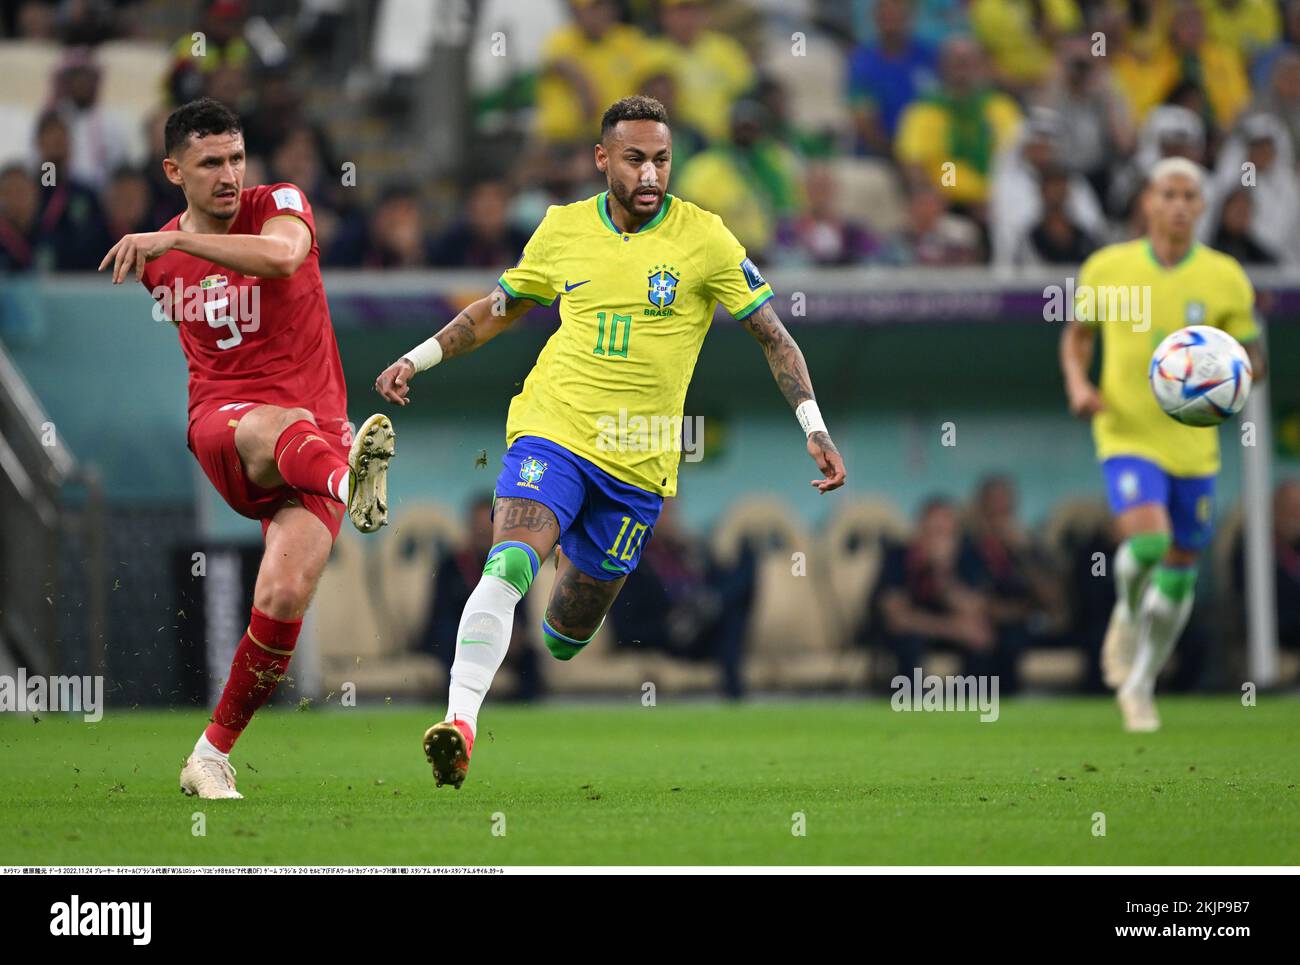 Neymar (10) of Brazil and Milos Veljkovic (5) of Serbia during the FIFA World Cup Qatar 2022 Group G match between Brazil 2-0 Serbia at Lusail Iconic Stadium in Lusail, Qatar, on November 24, 2022. Credit: Takamoto Tokuhara/AFLO/Alamy Live News Stock Photo